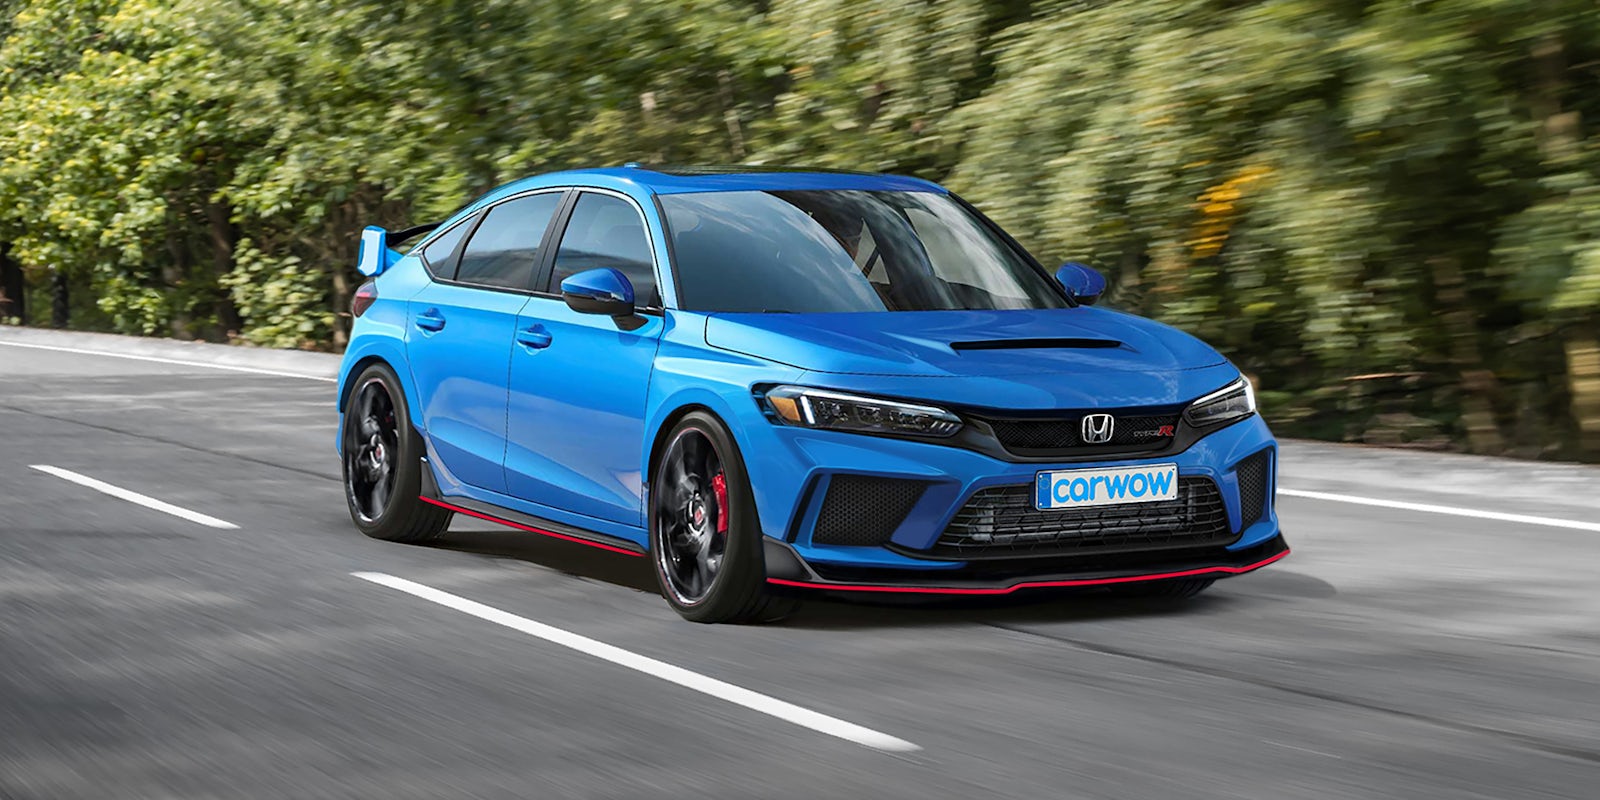 2023 Honda Civic Type R Rendered Price Specs And Release Date Carwow